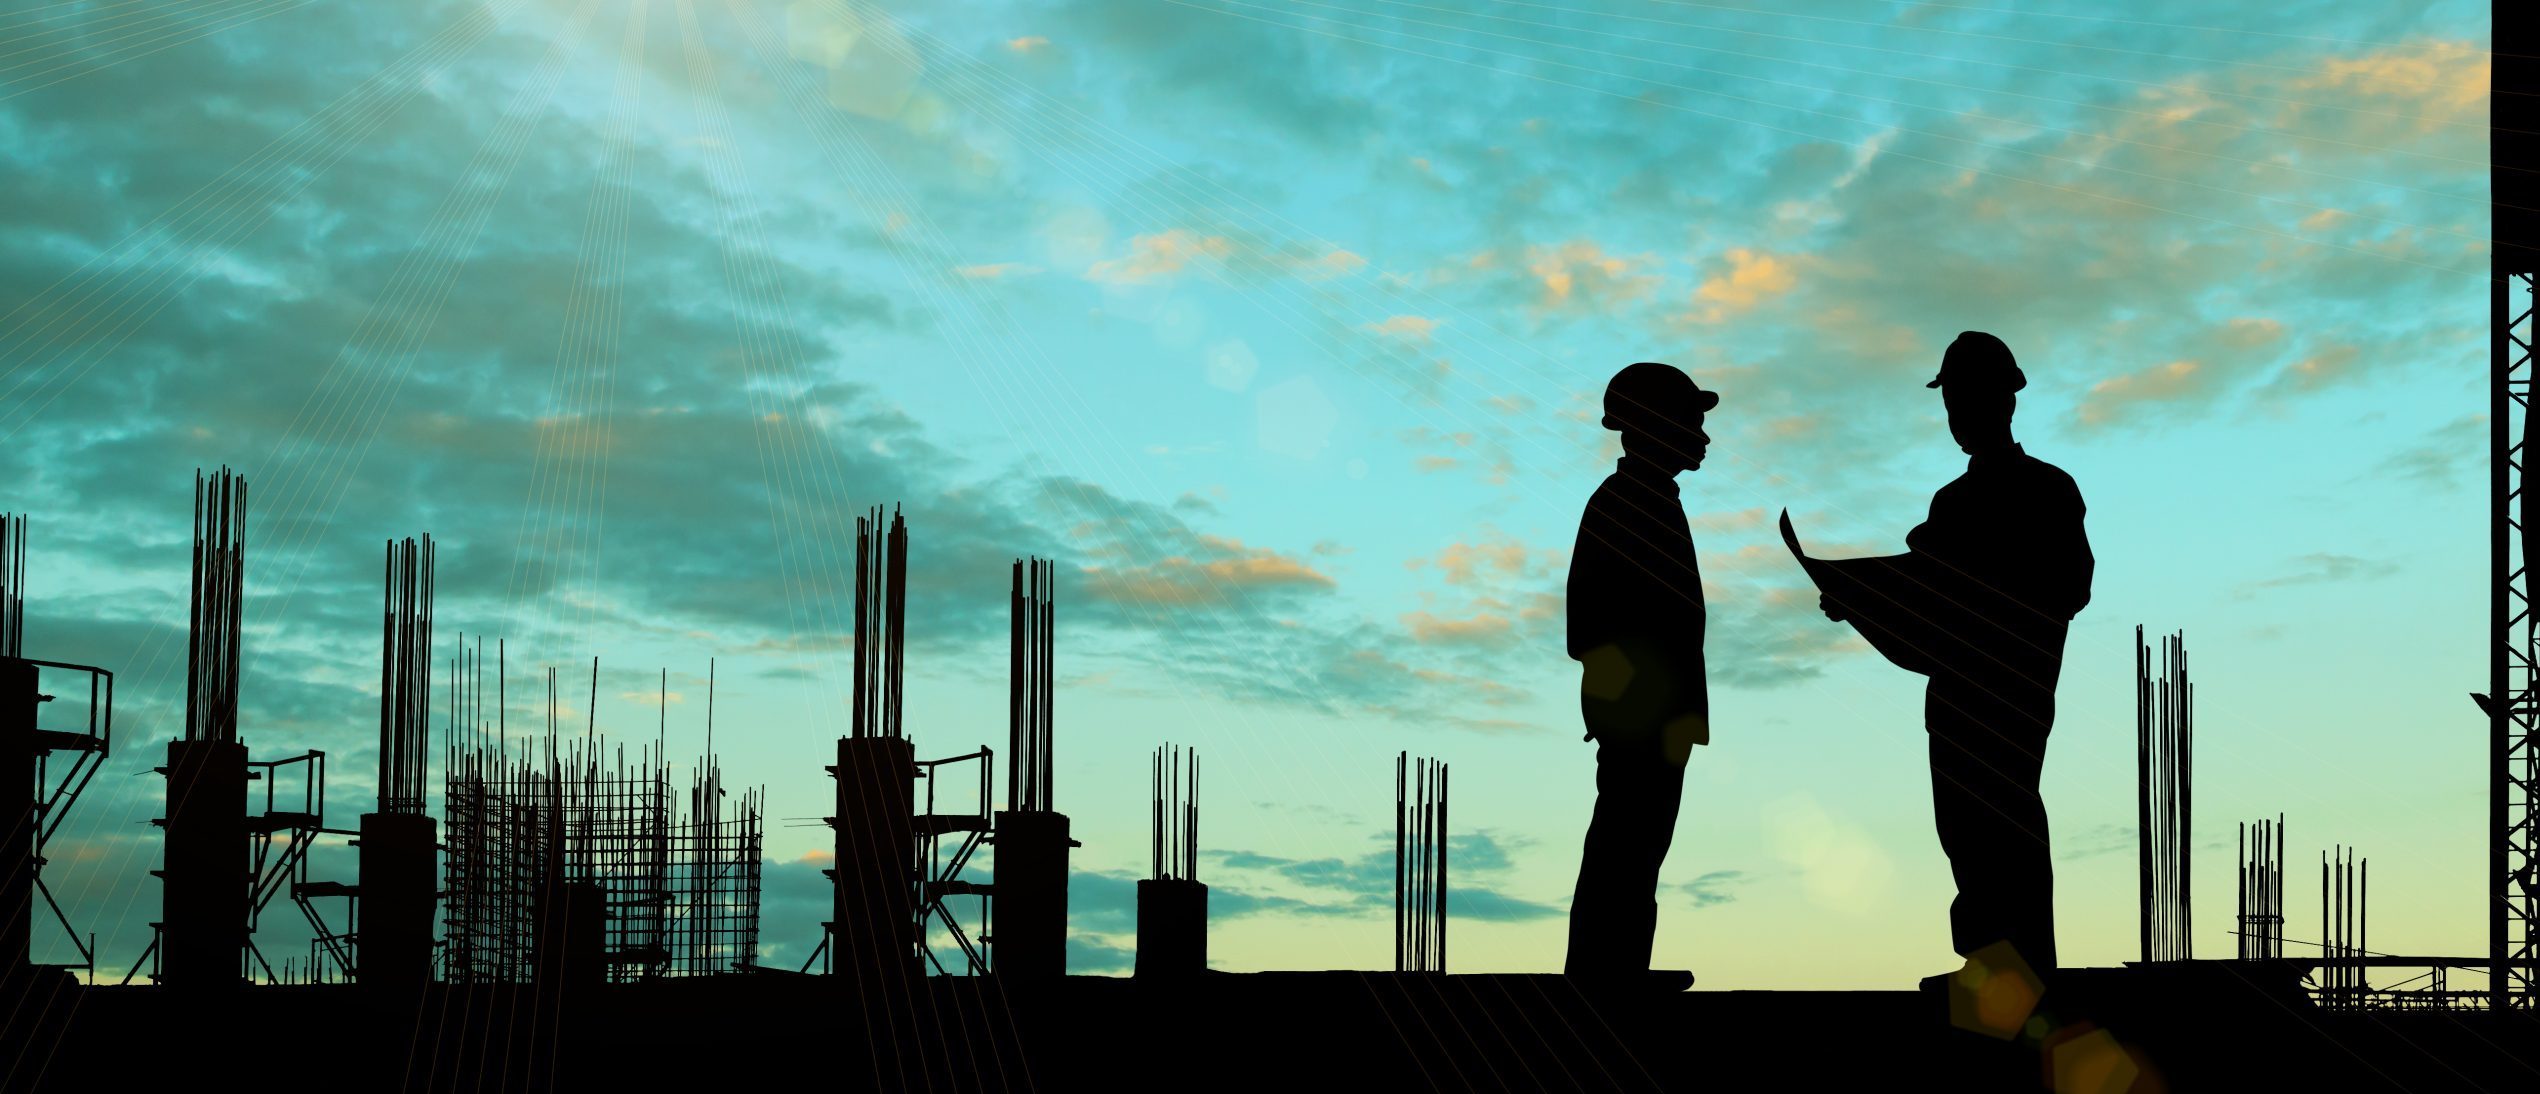 A silhouette image of construction site and 2 men